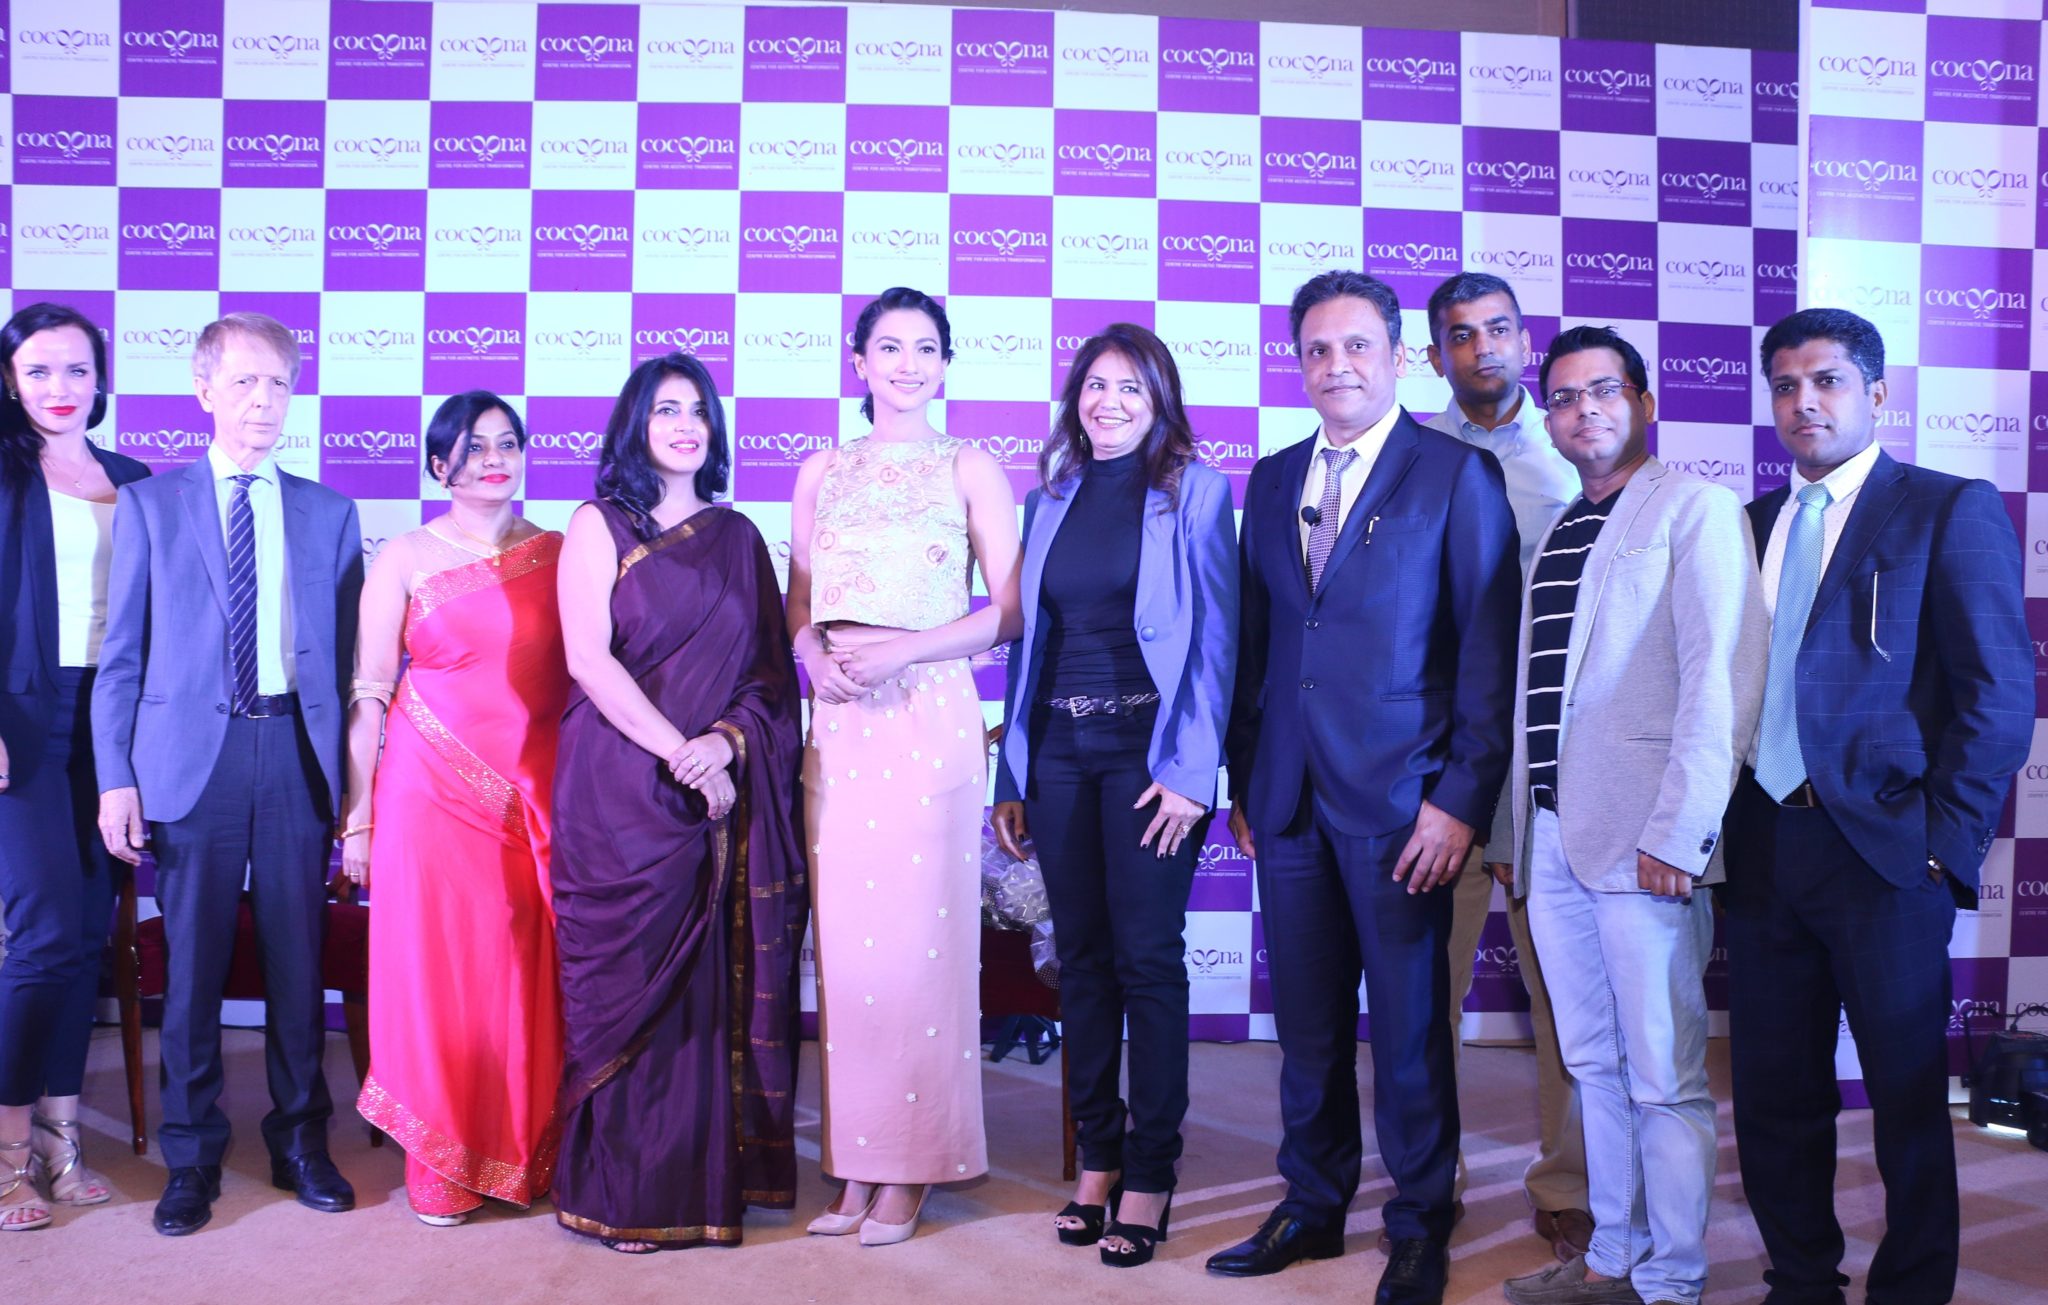 Cocoona team at the launch of Cocoona Centre For Aesthetic Transformation in New Delhi with Gauahar Khan